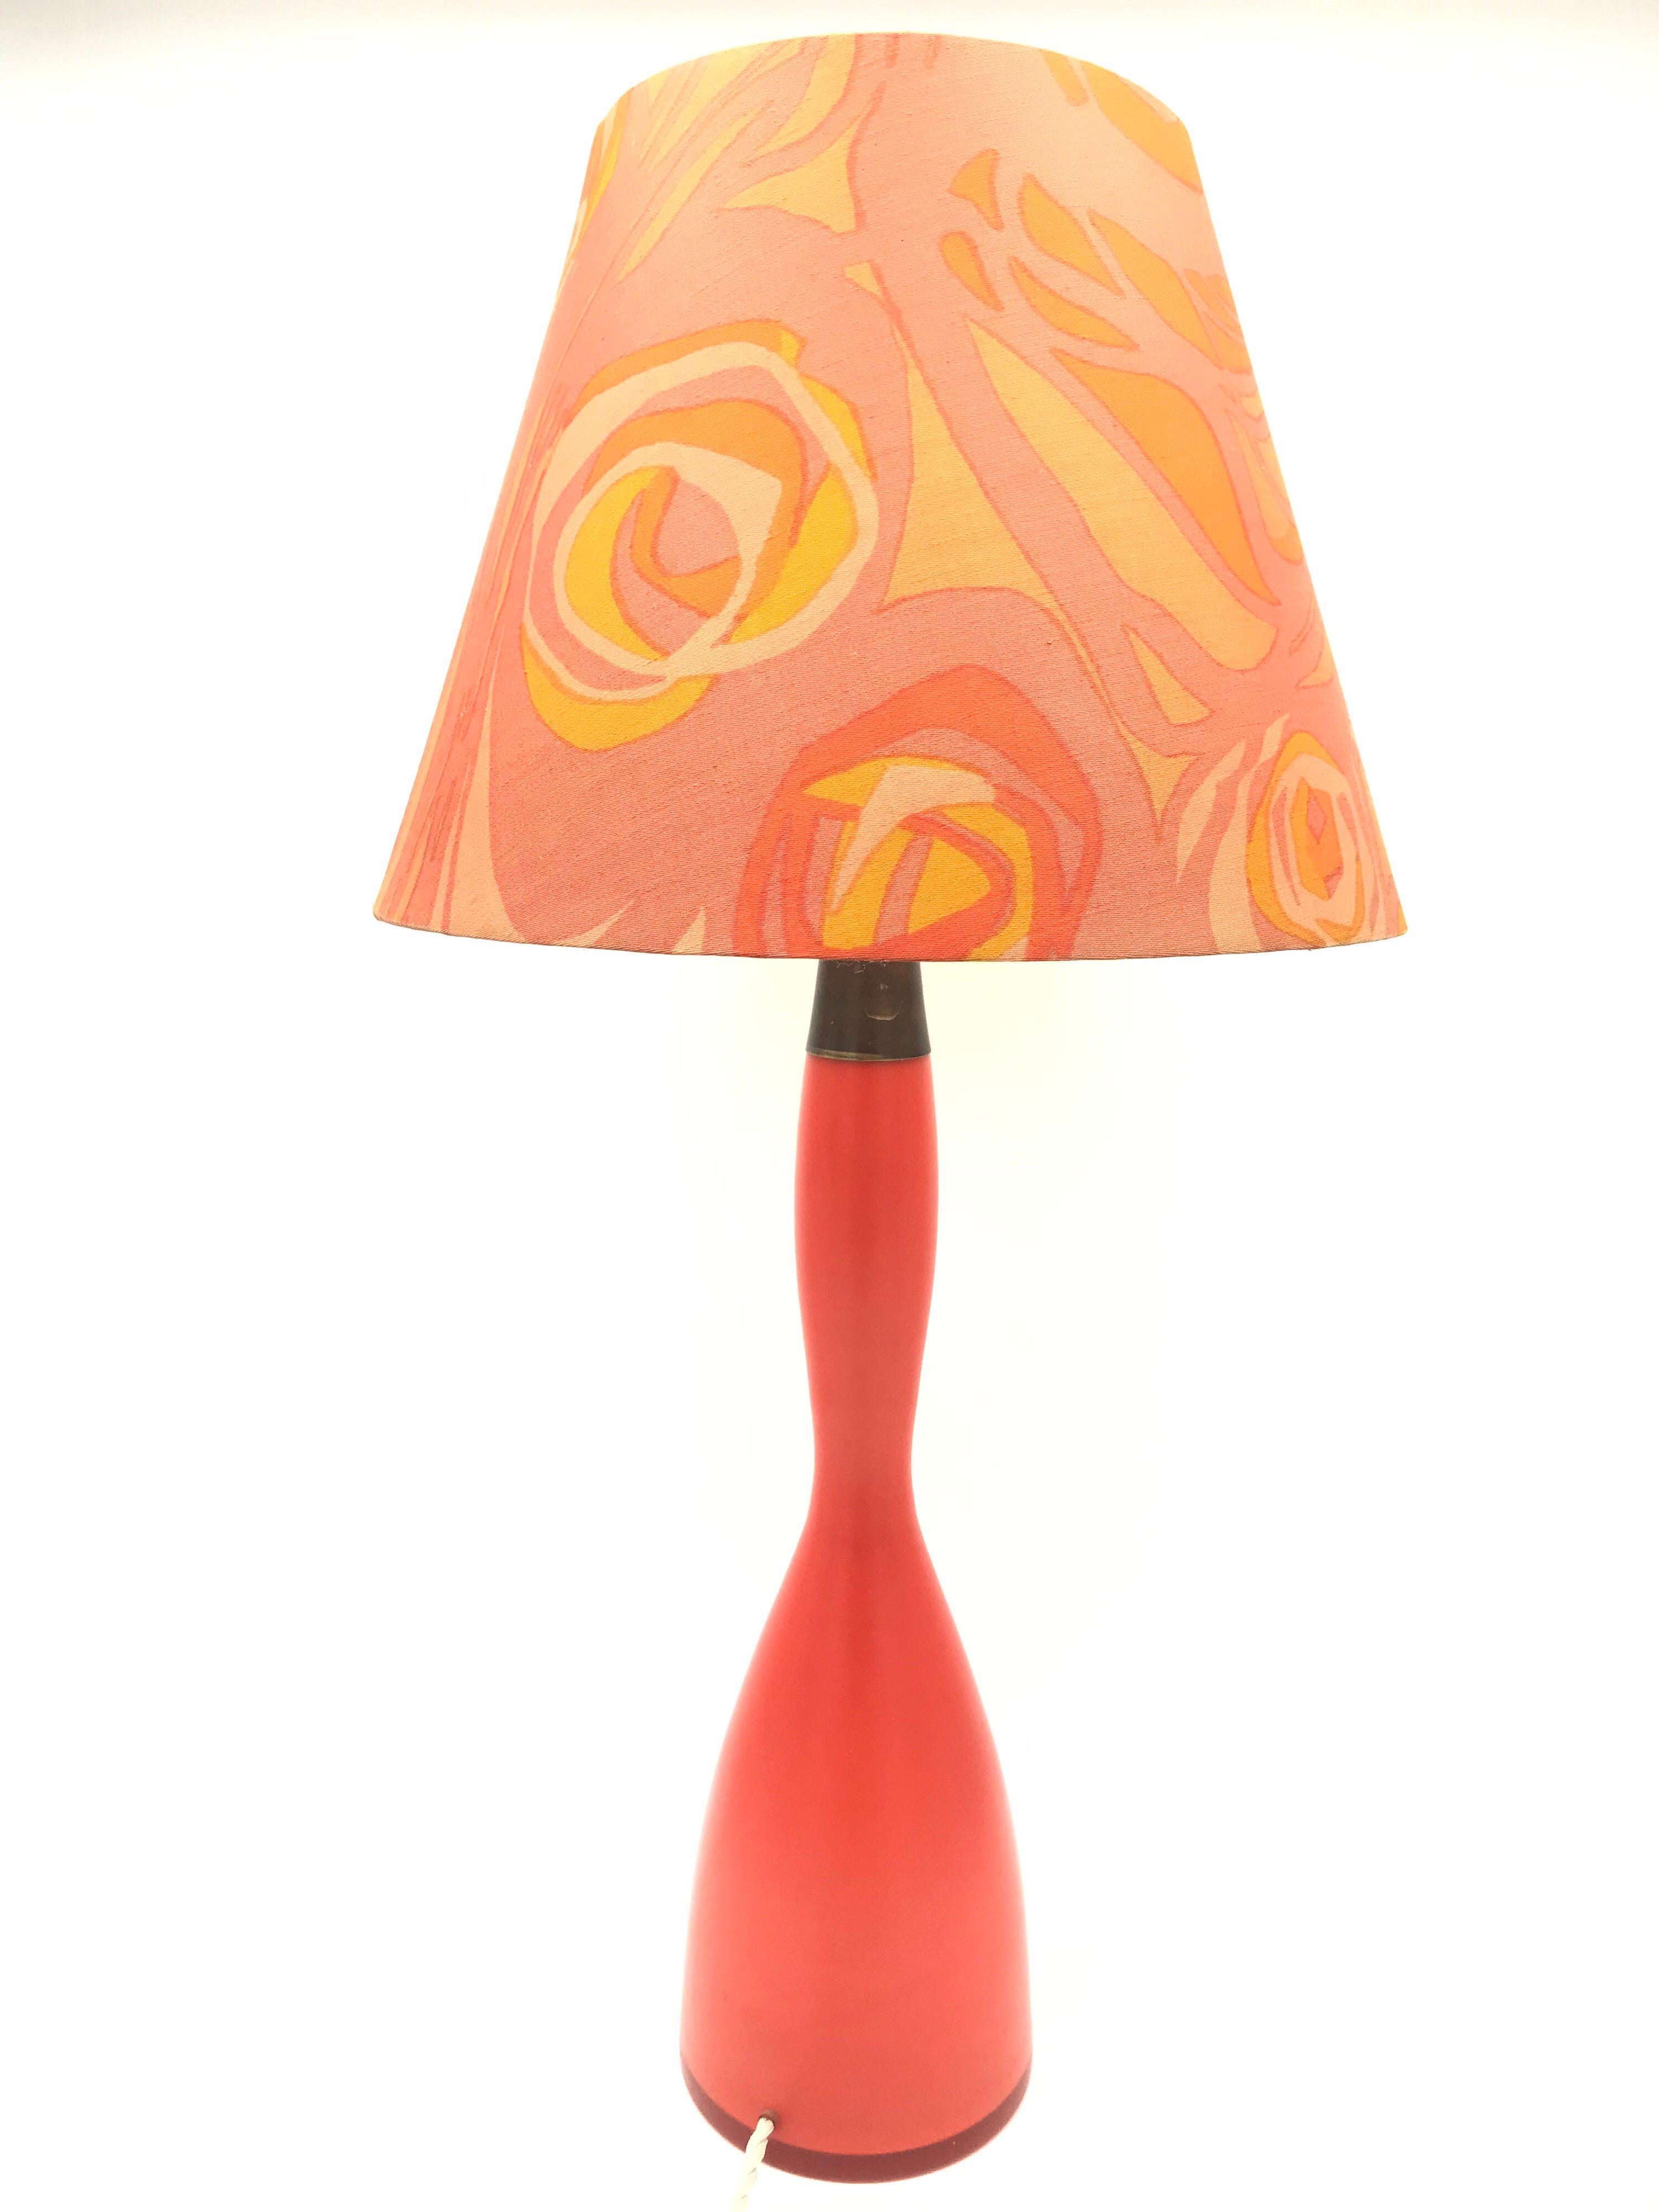 A stunning retro vintage psychedelic table lamp made by Kastrup glass of Denmark in hand blown glass.
This lamp is so retro and is straight from a time of the mini skirt, hot pants, coloured tights and plastic macs.
A design and color reminiscent of